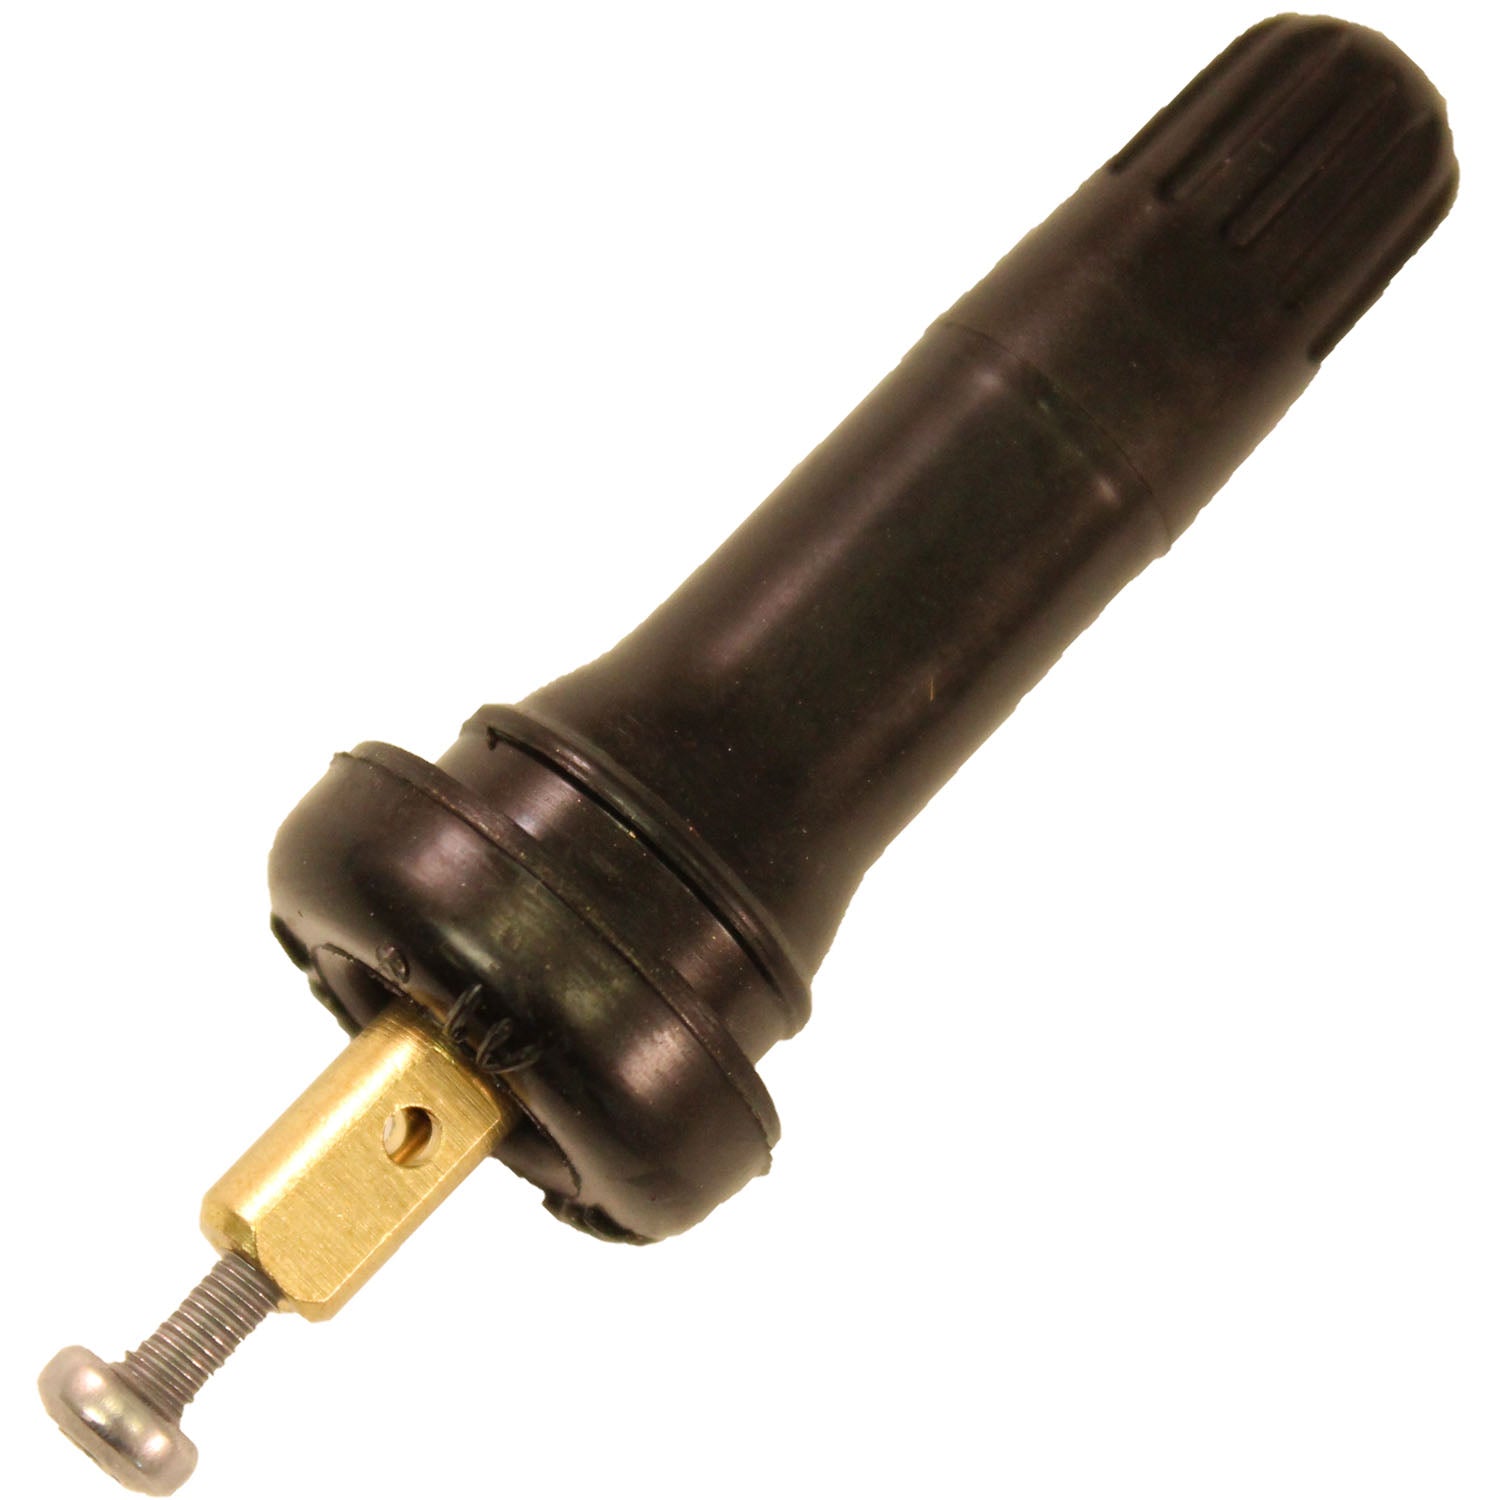 Presta Valve and Key for Replacement